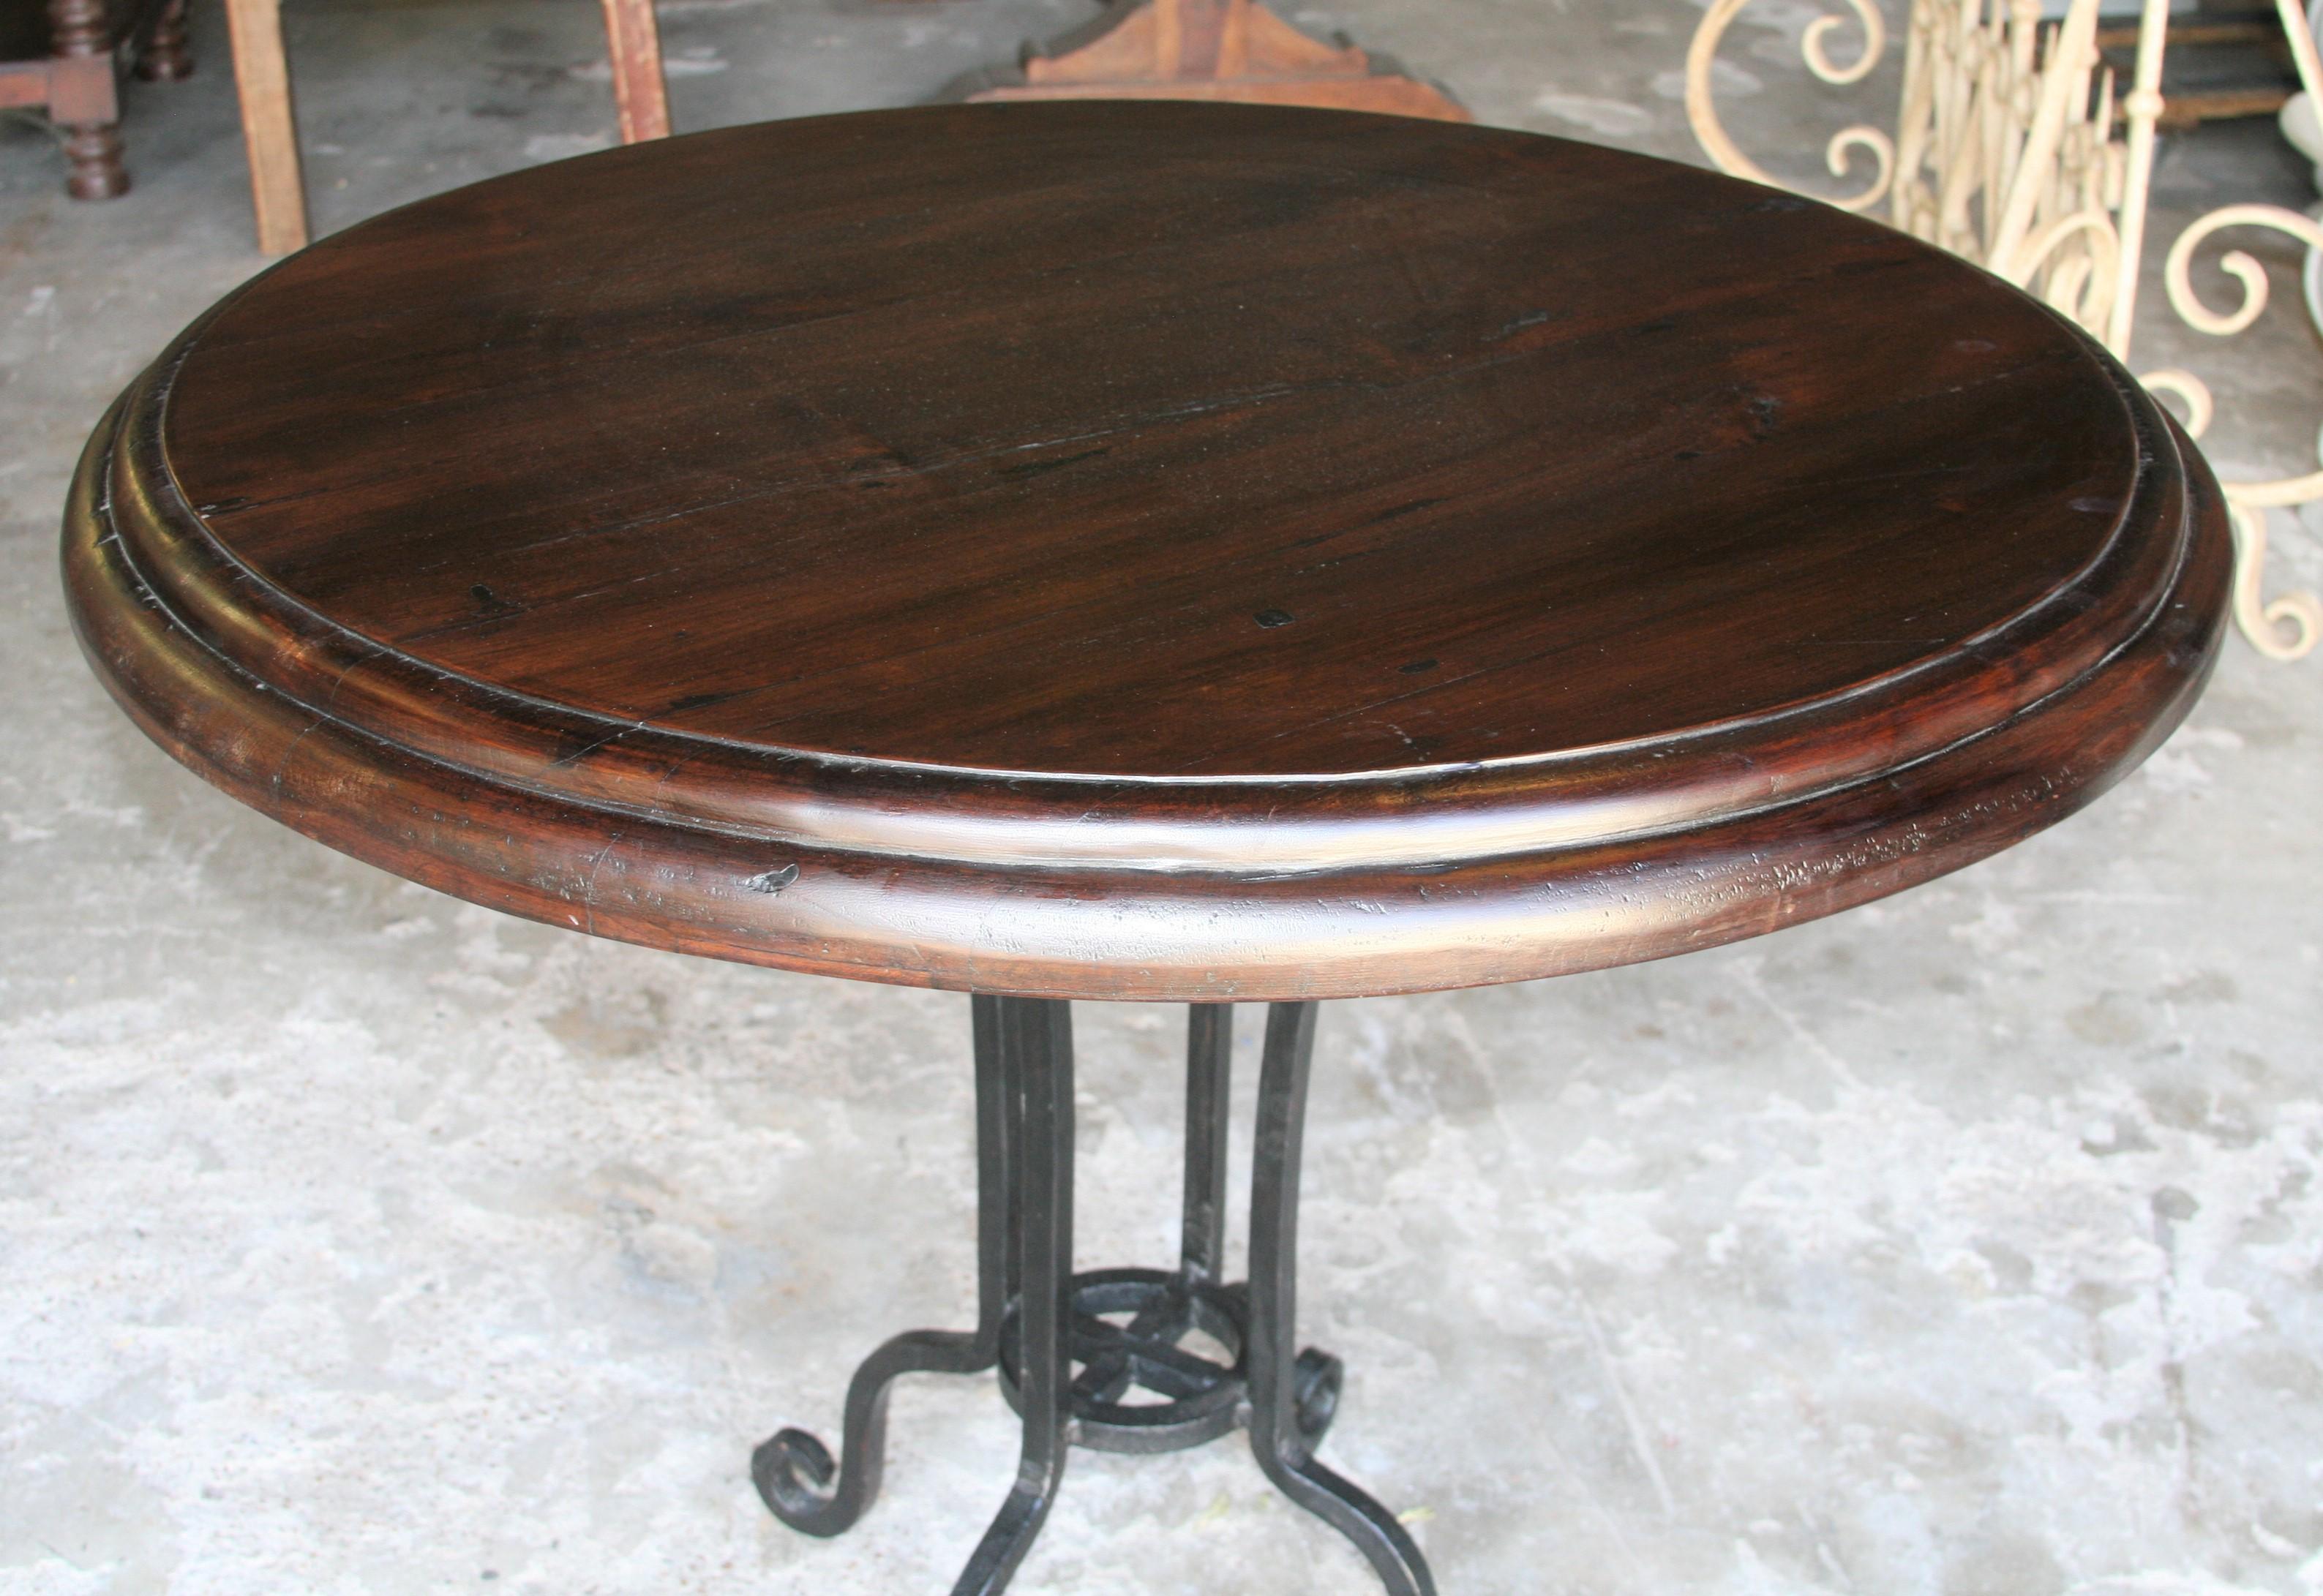 This unusual almost indestructible ceremonial table was custom made for a settler in the southern peninsula of India.
It is made of very fine solid teak wood. It is solid 2.5 inches thick all through the entire diameter. To day from the same amount